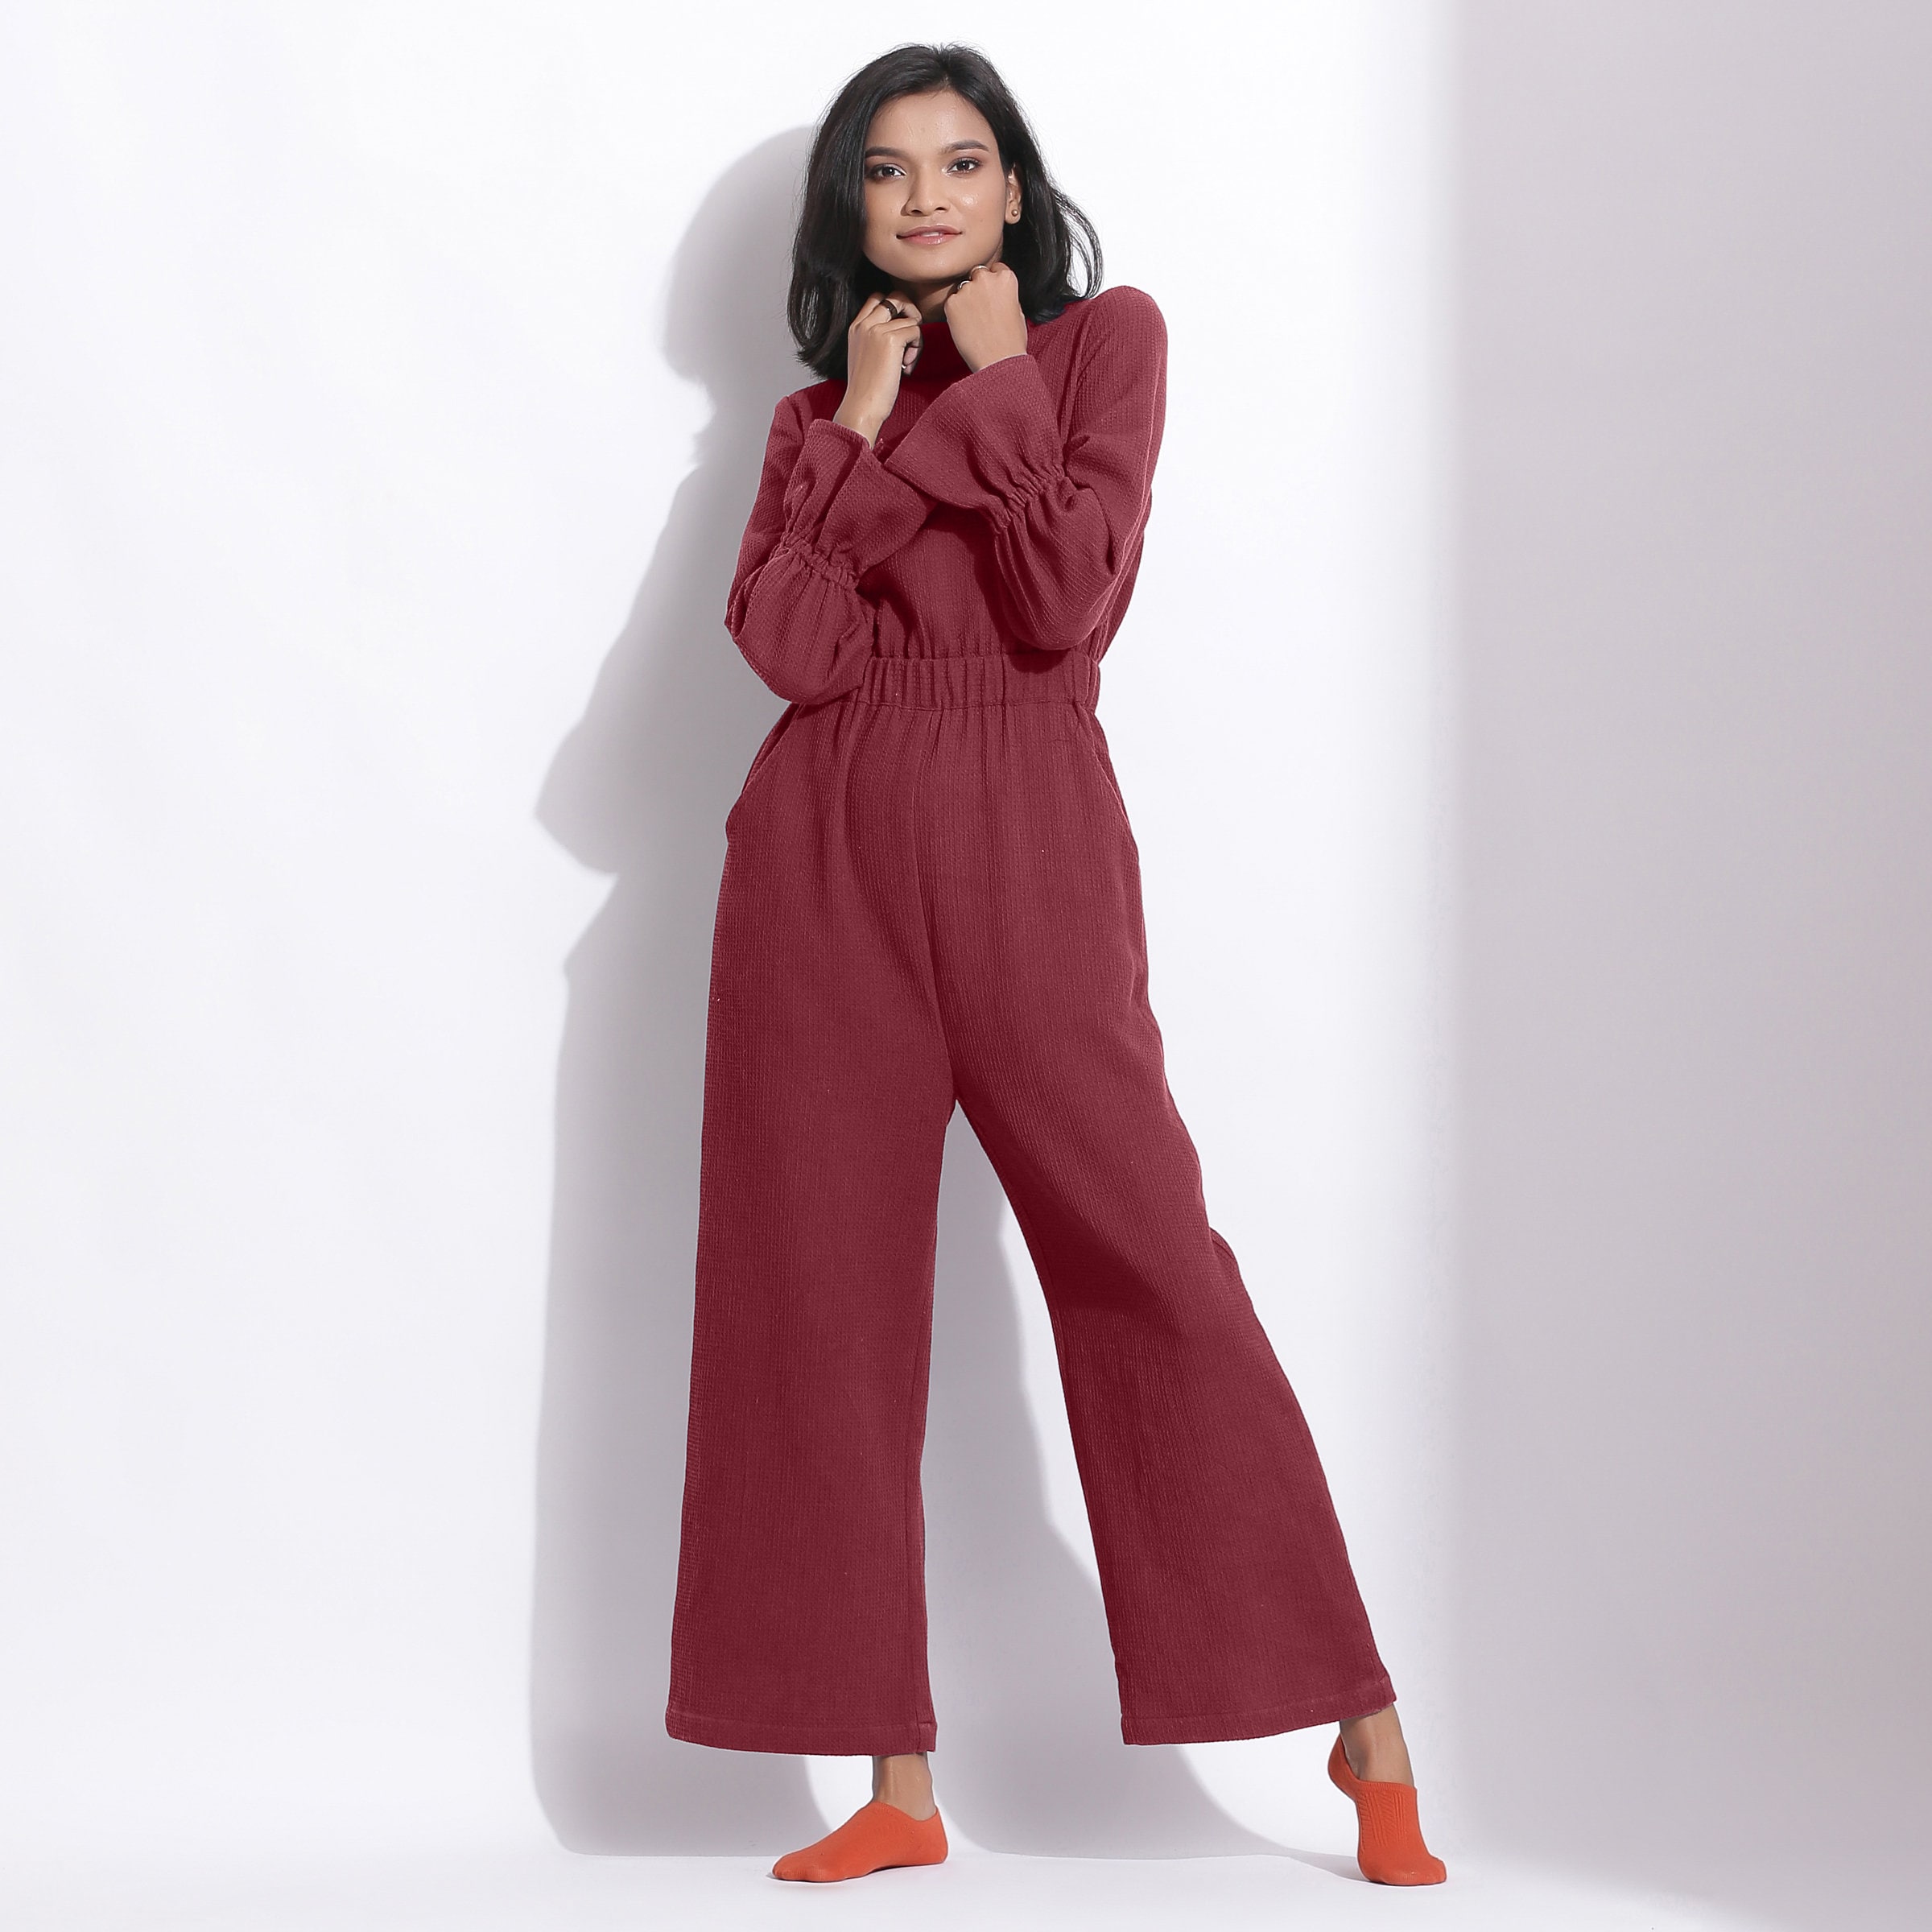 Red Jumpsuit  Buy Trendy Red Jumpsuit Online in India  Myntra